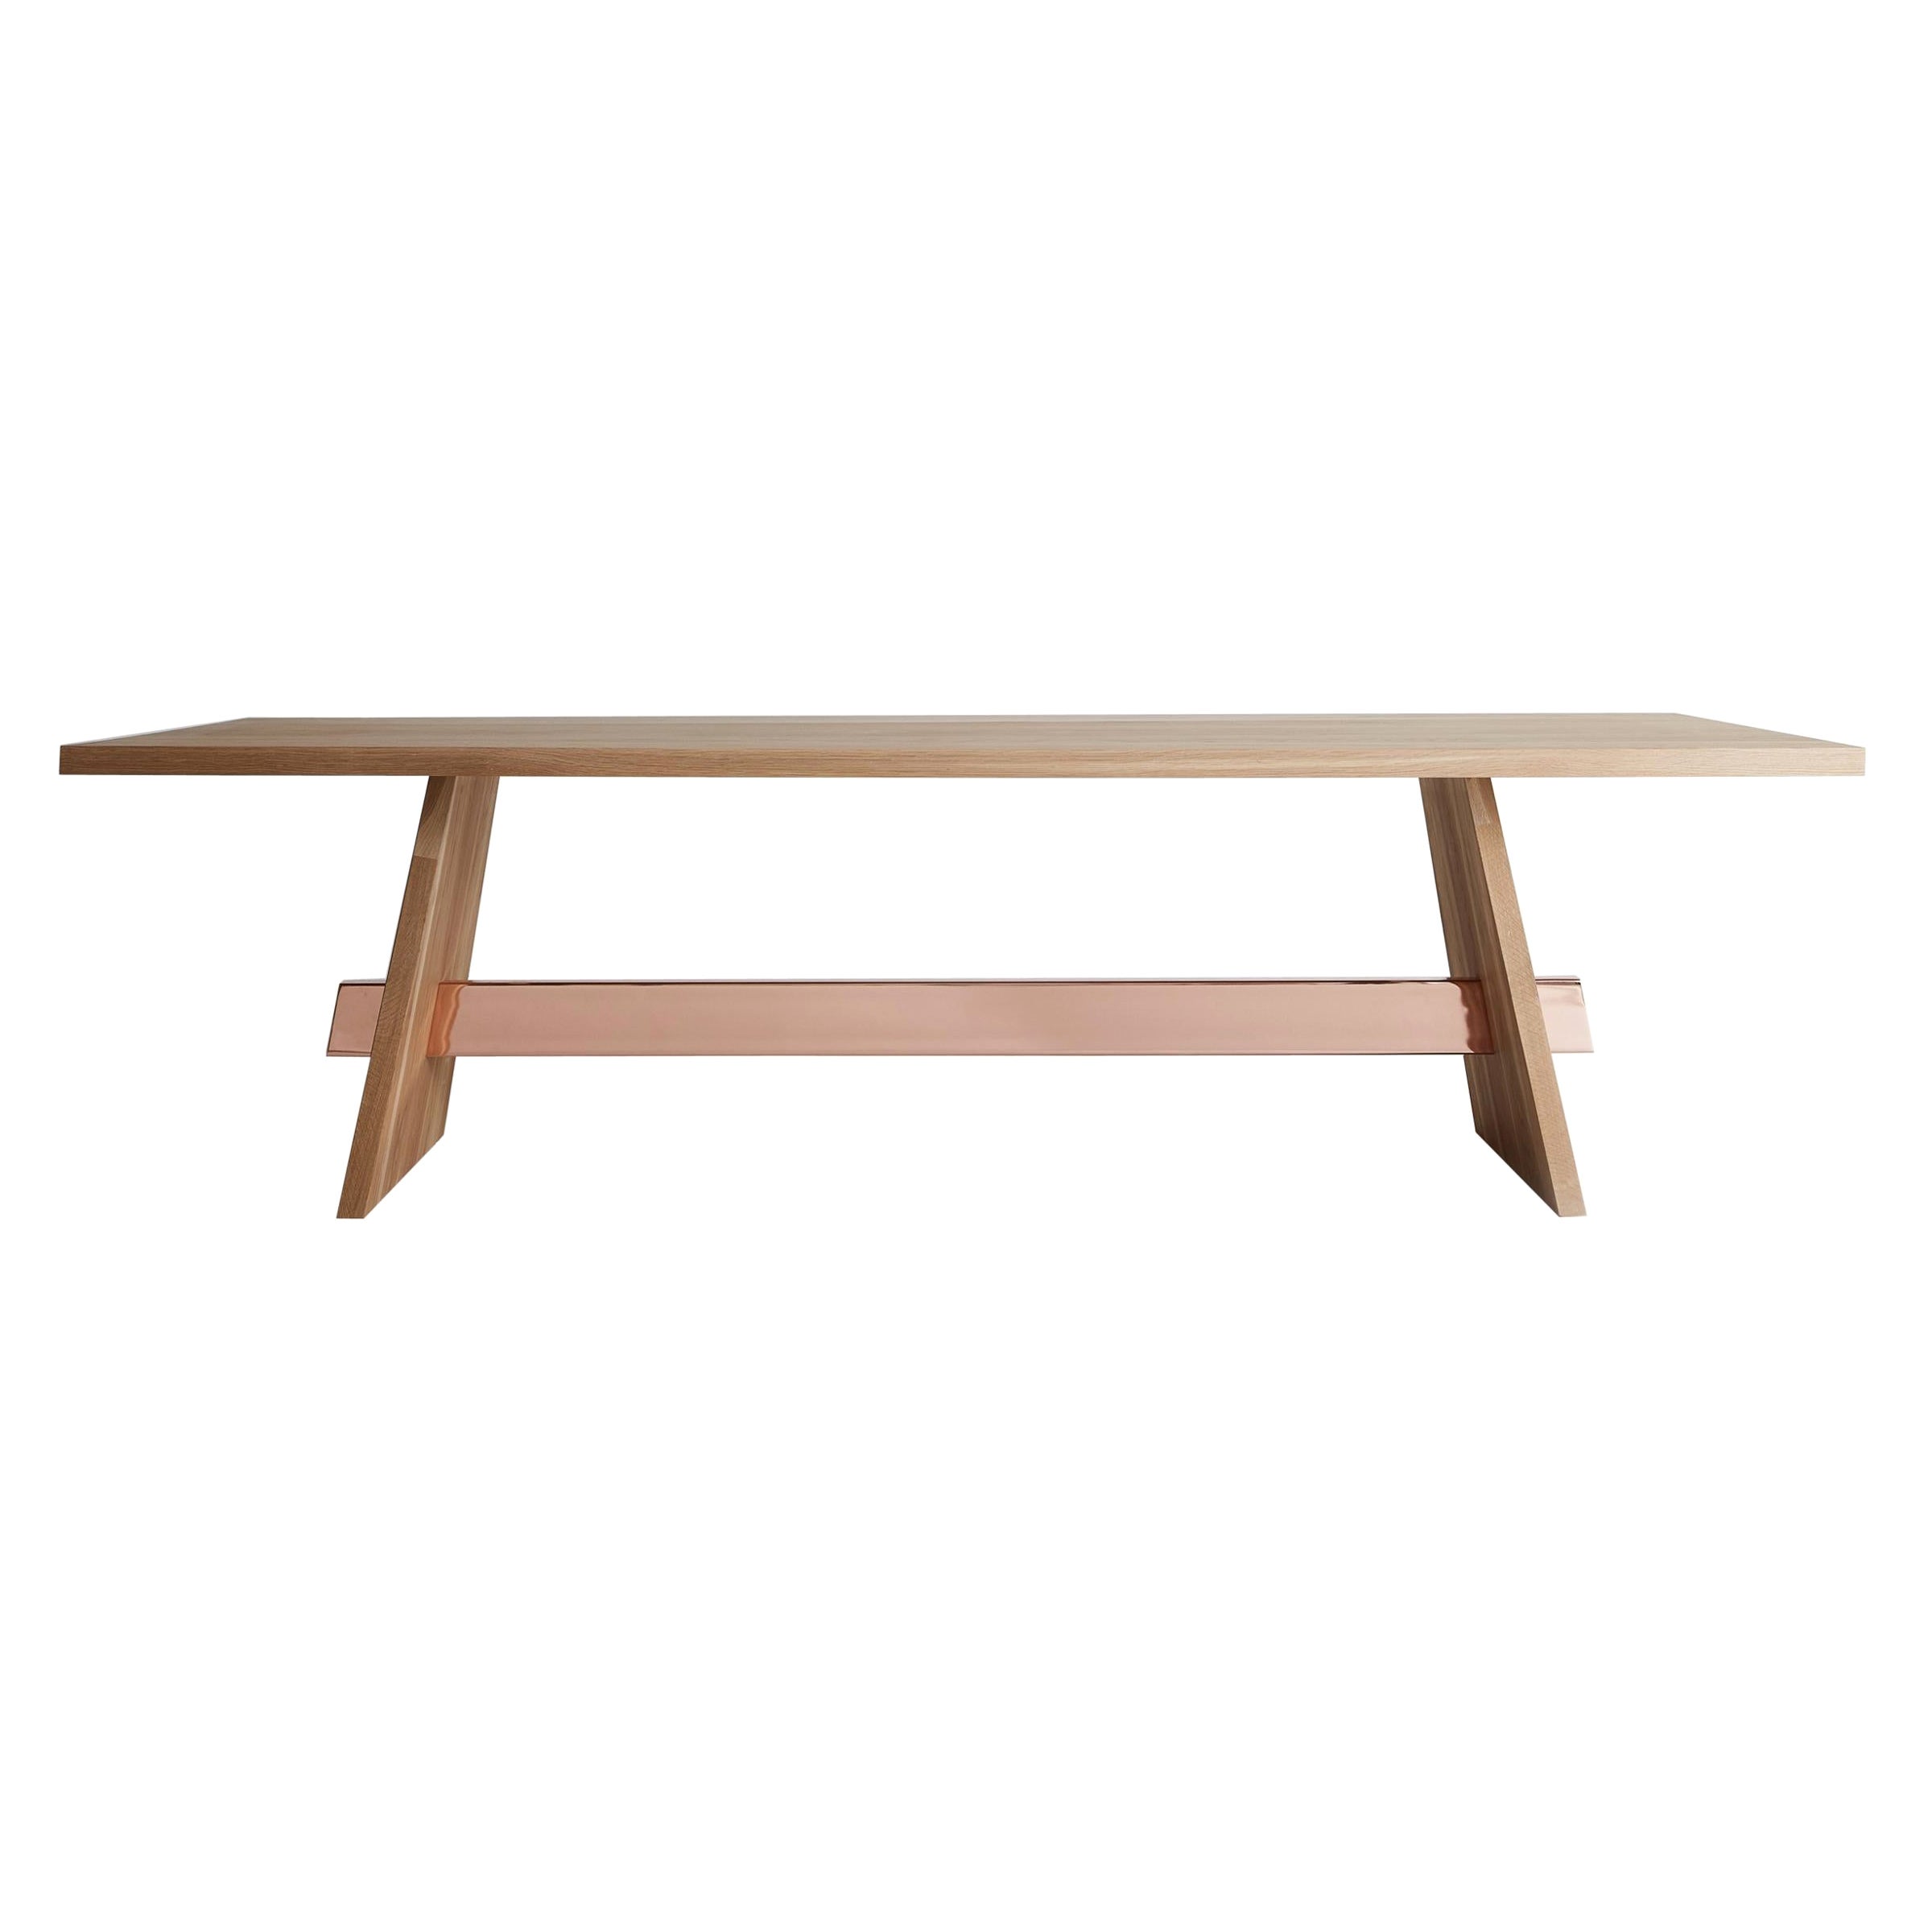 Metal Plated Walnut Large Isthmus Dining Table by Hollis & Morris